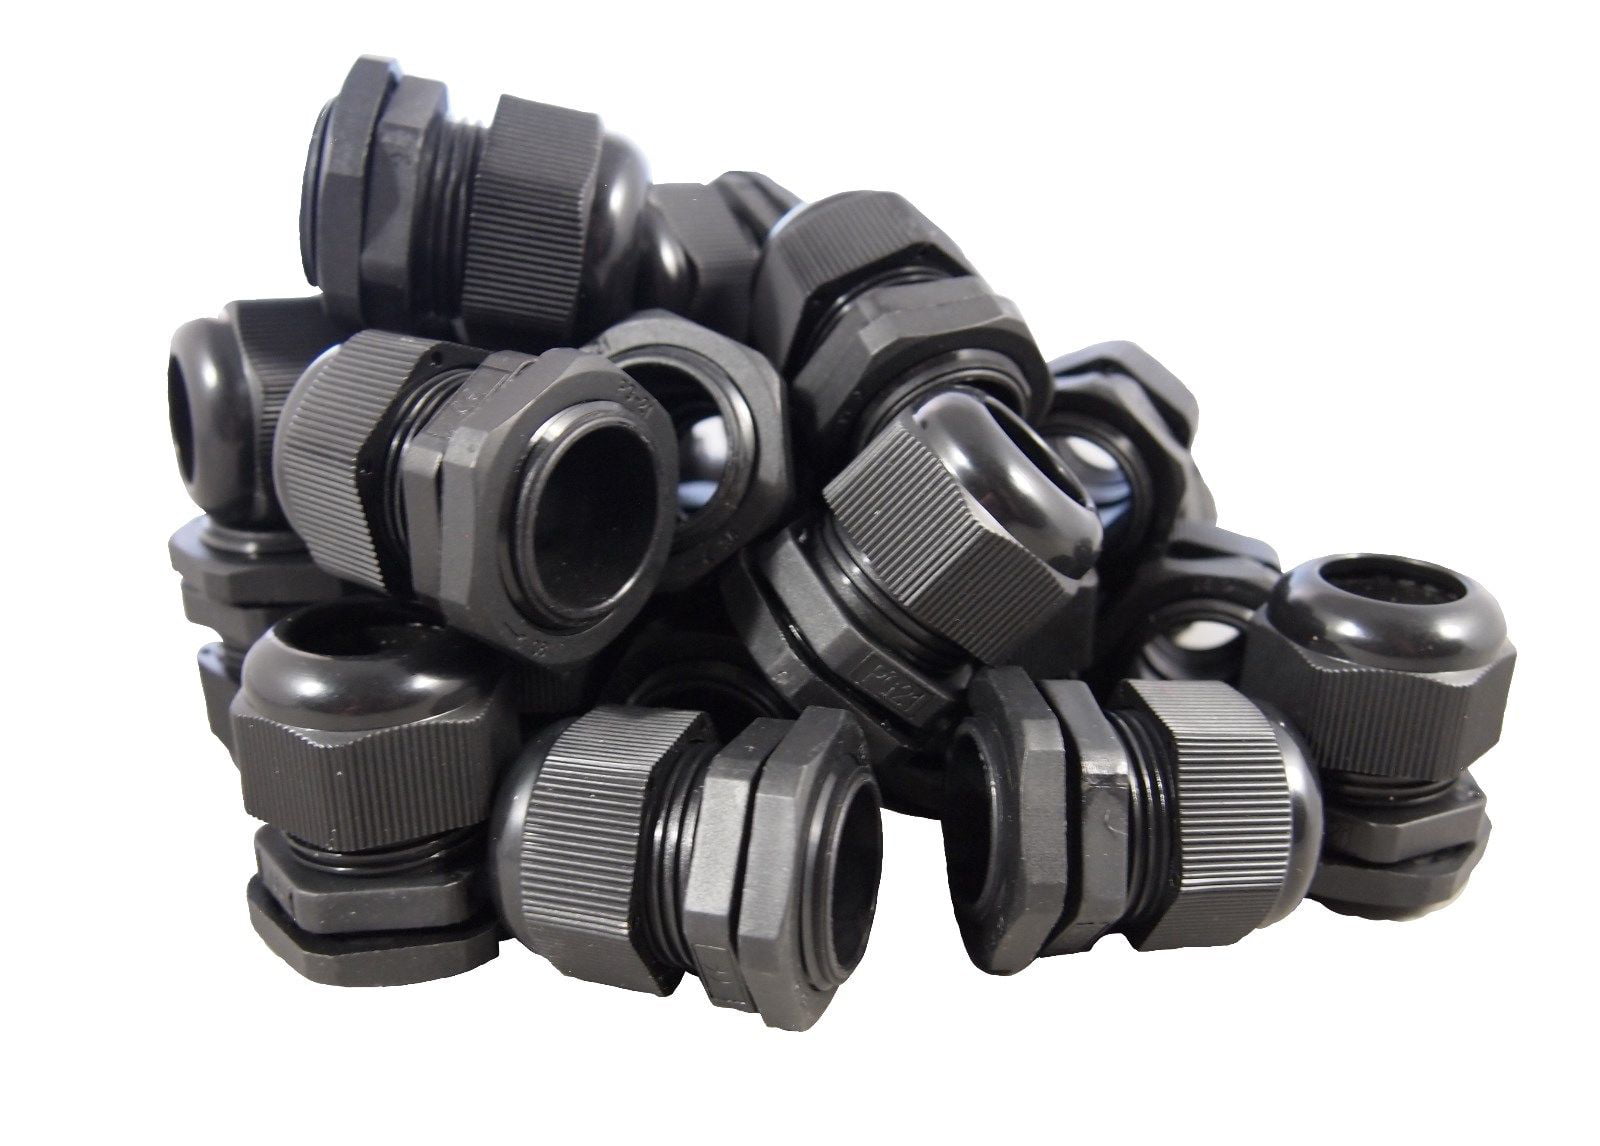 Conduit & Fittings 13-18mm Wire Waterproof Locknut Cable Electrical Boxes Gland 4pcs Aexit Nylon PG21 Electrical Boxes 